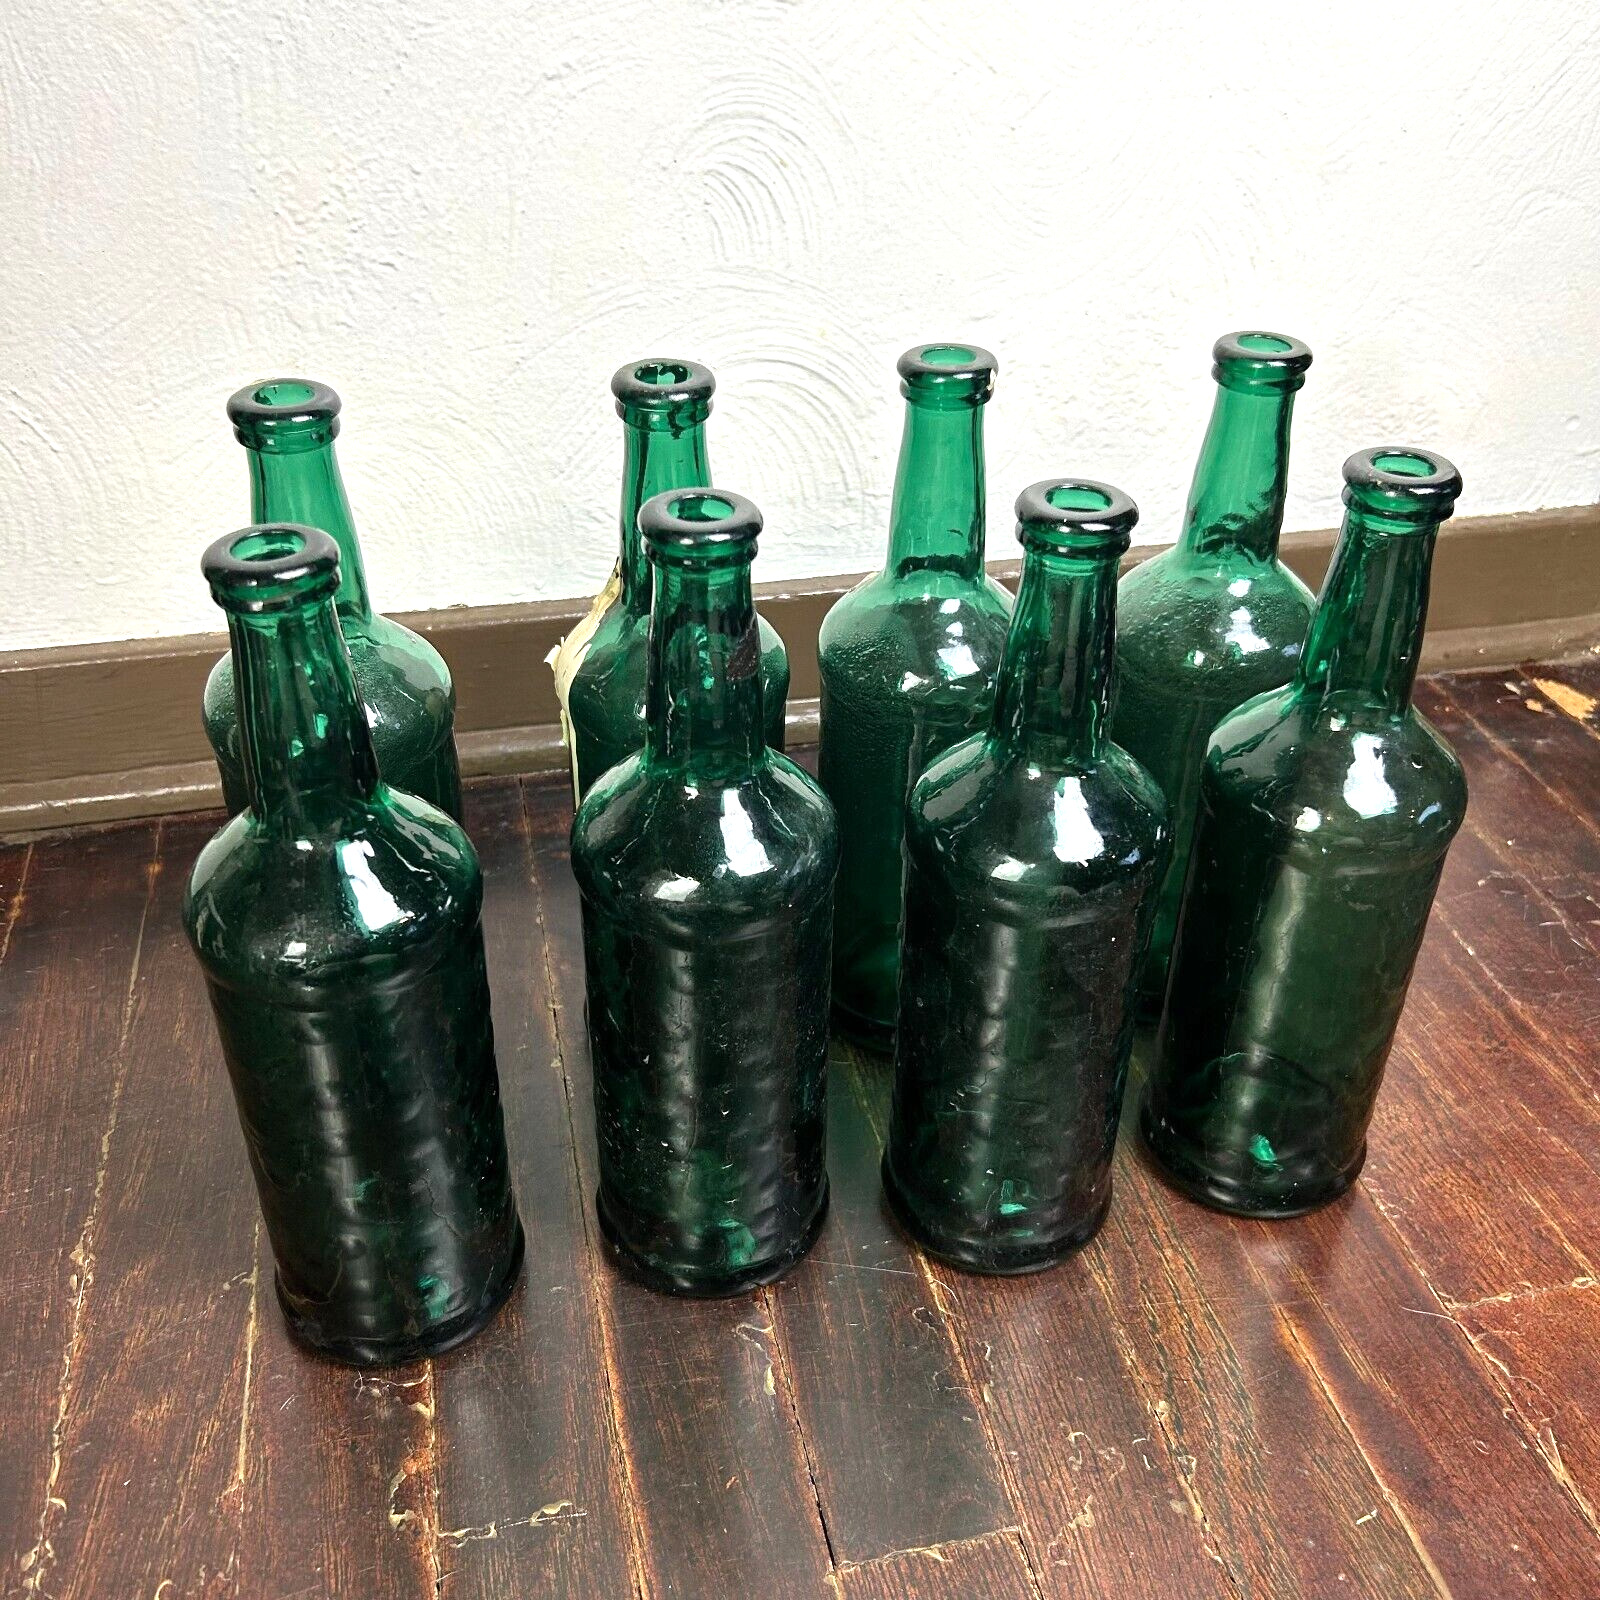 Antique Glass Bottle Lot Of 8 Green Clear Tall Heavy Thick Glass Liquor Wine